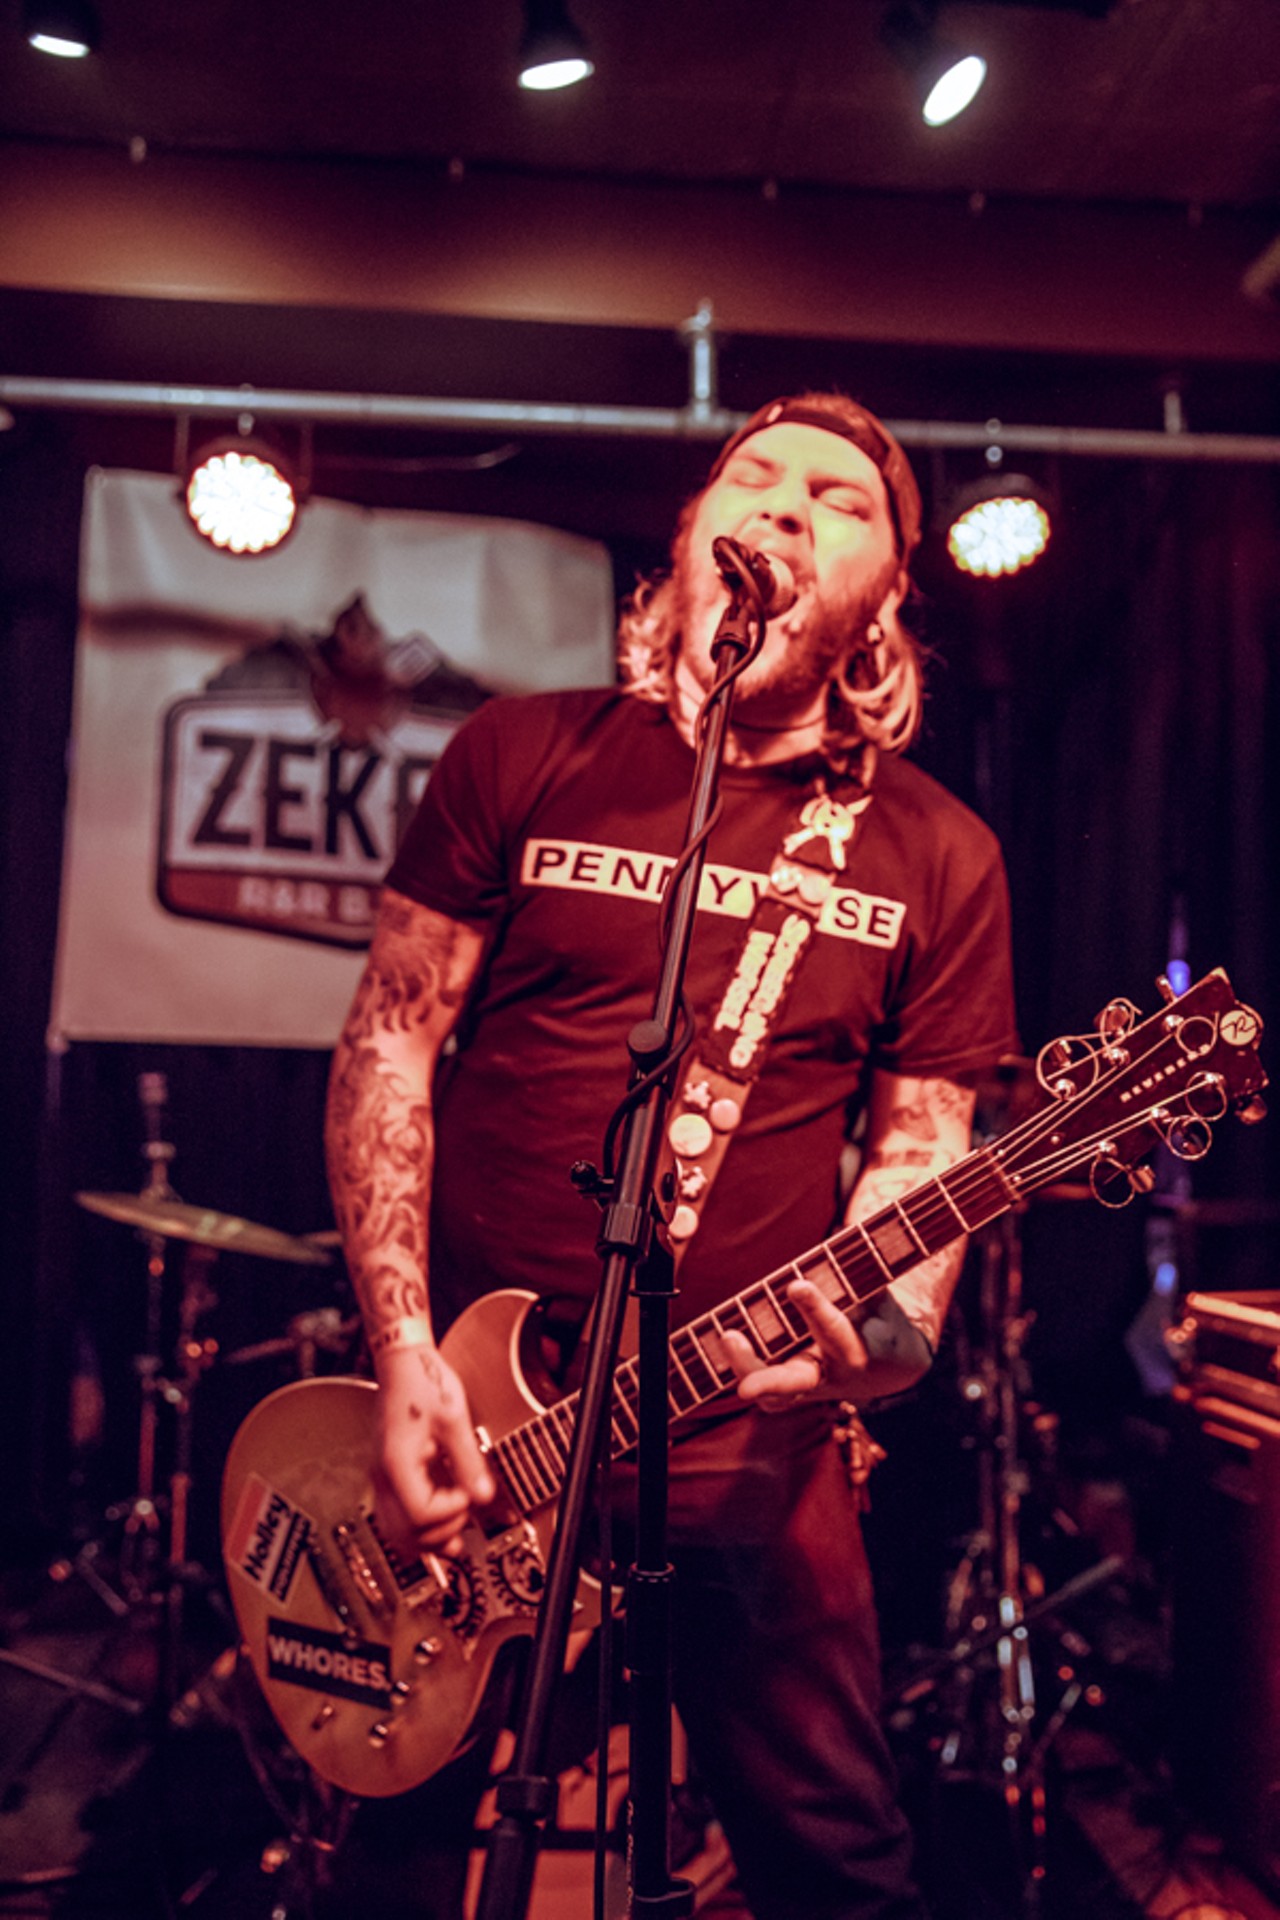 24 photos from the Suicide Machines at Zeke's Rock 'N' Roll BBQ